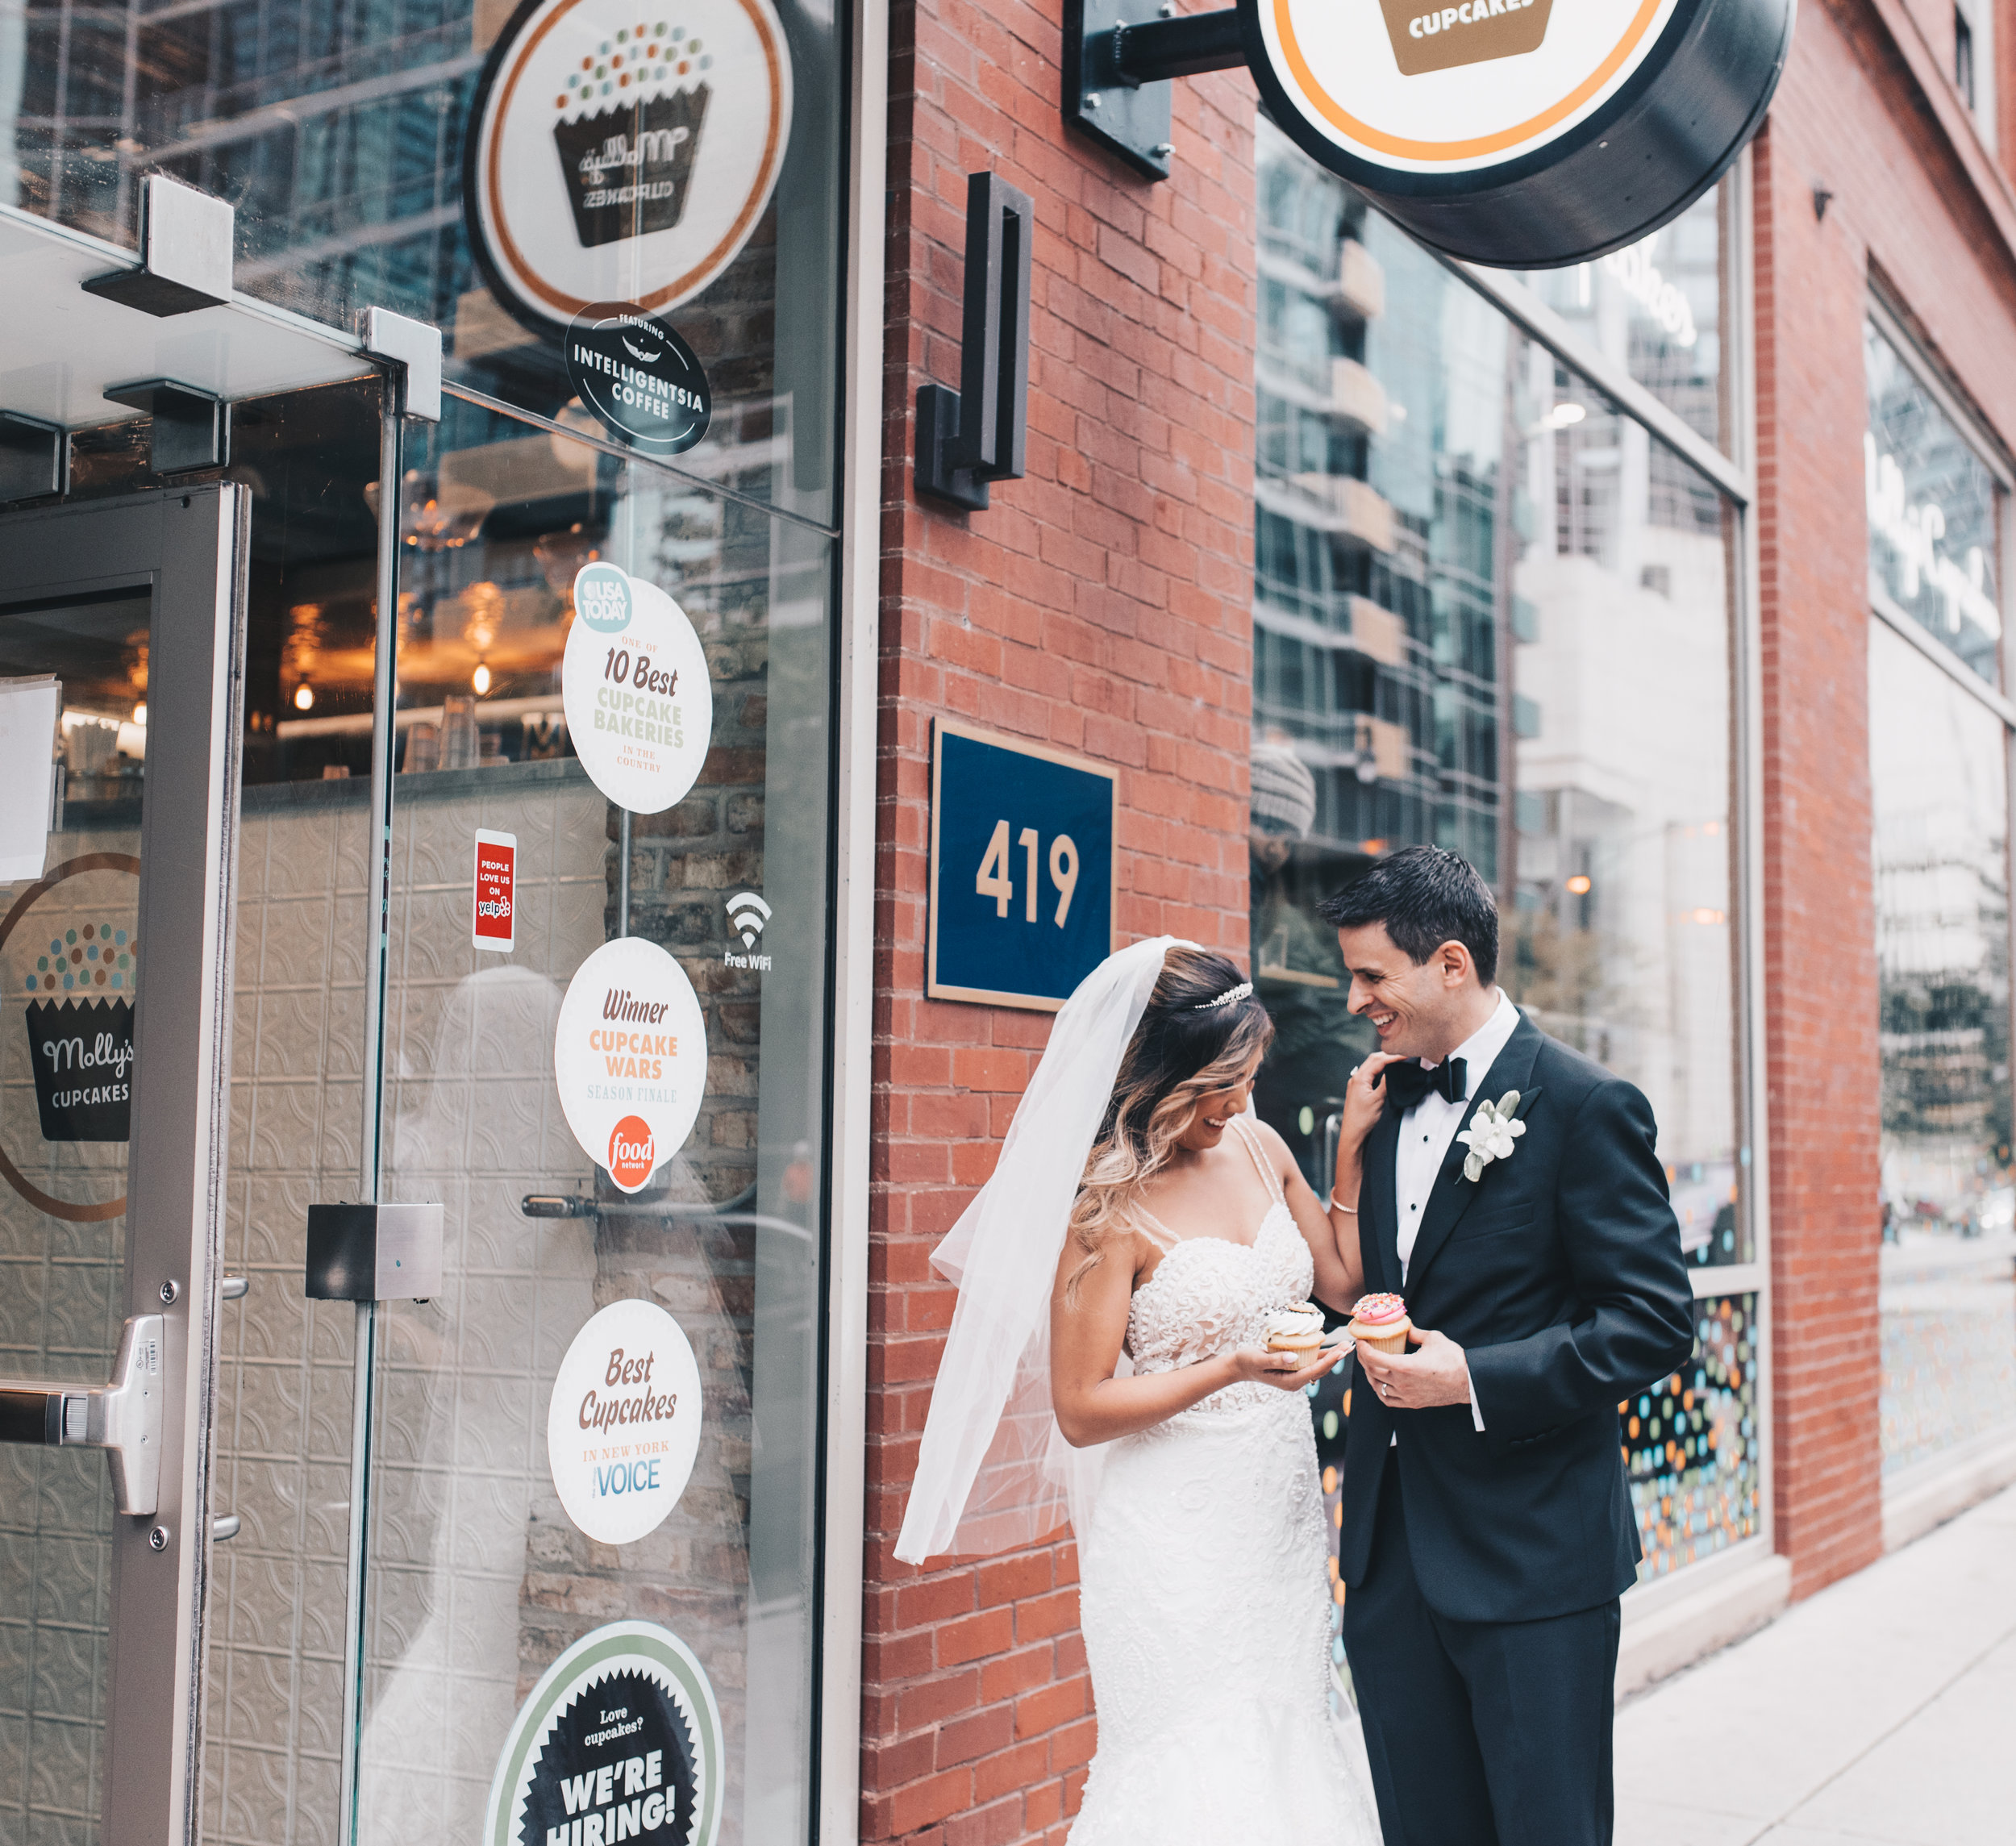 Chicago Bride and Groom Photos, Chicago Wedding, Chicago Wedding Photographer, Chicago Elopement Photographer, Chicago Bride and Groom Photos, Bride and Groom Photos